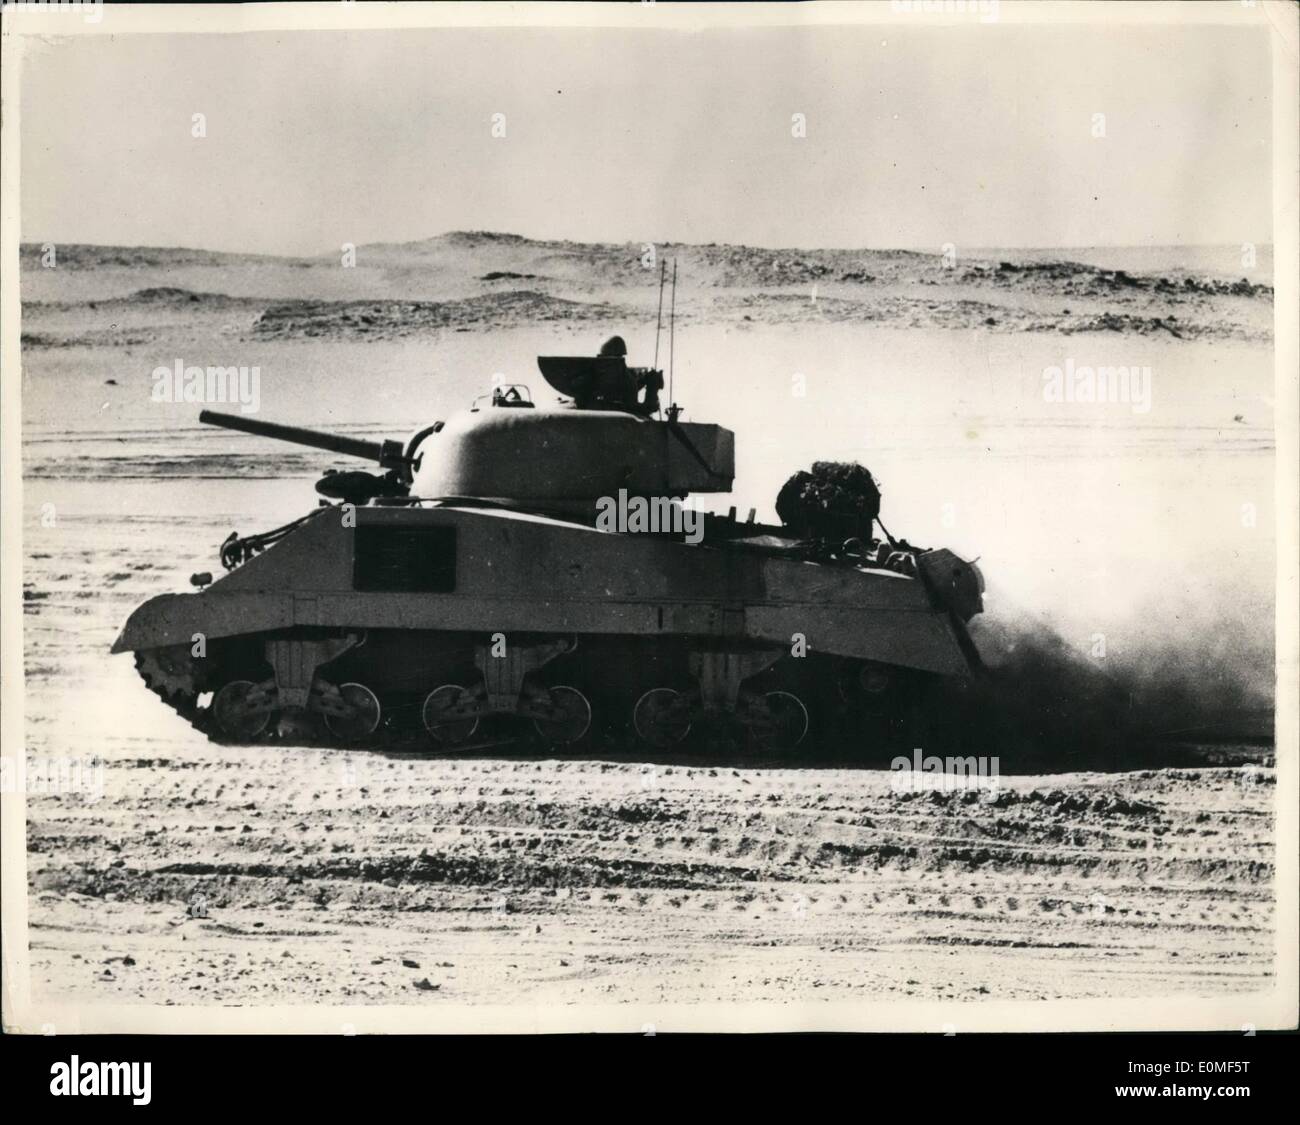 Dec. 12, 1954 - Prime minister of Egypt attends desert manoeuvrings a tank in action. photo shows A heavy in action - during the Manoeuvrings of the Egyptian forces in the desert - west of Cairo recently. The maneuvers were attended by prime minister gamel abdul Nasser - and other members of the Revolutionary council. Stock Photo